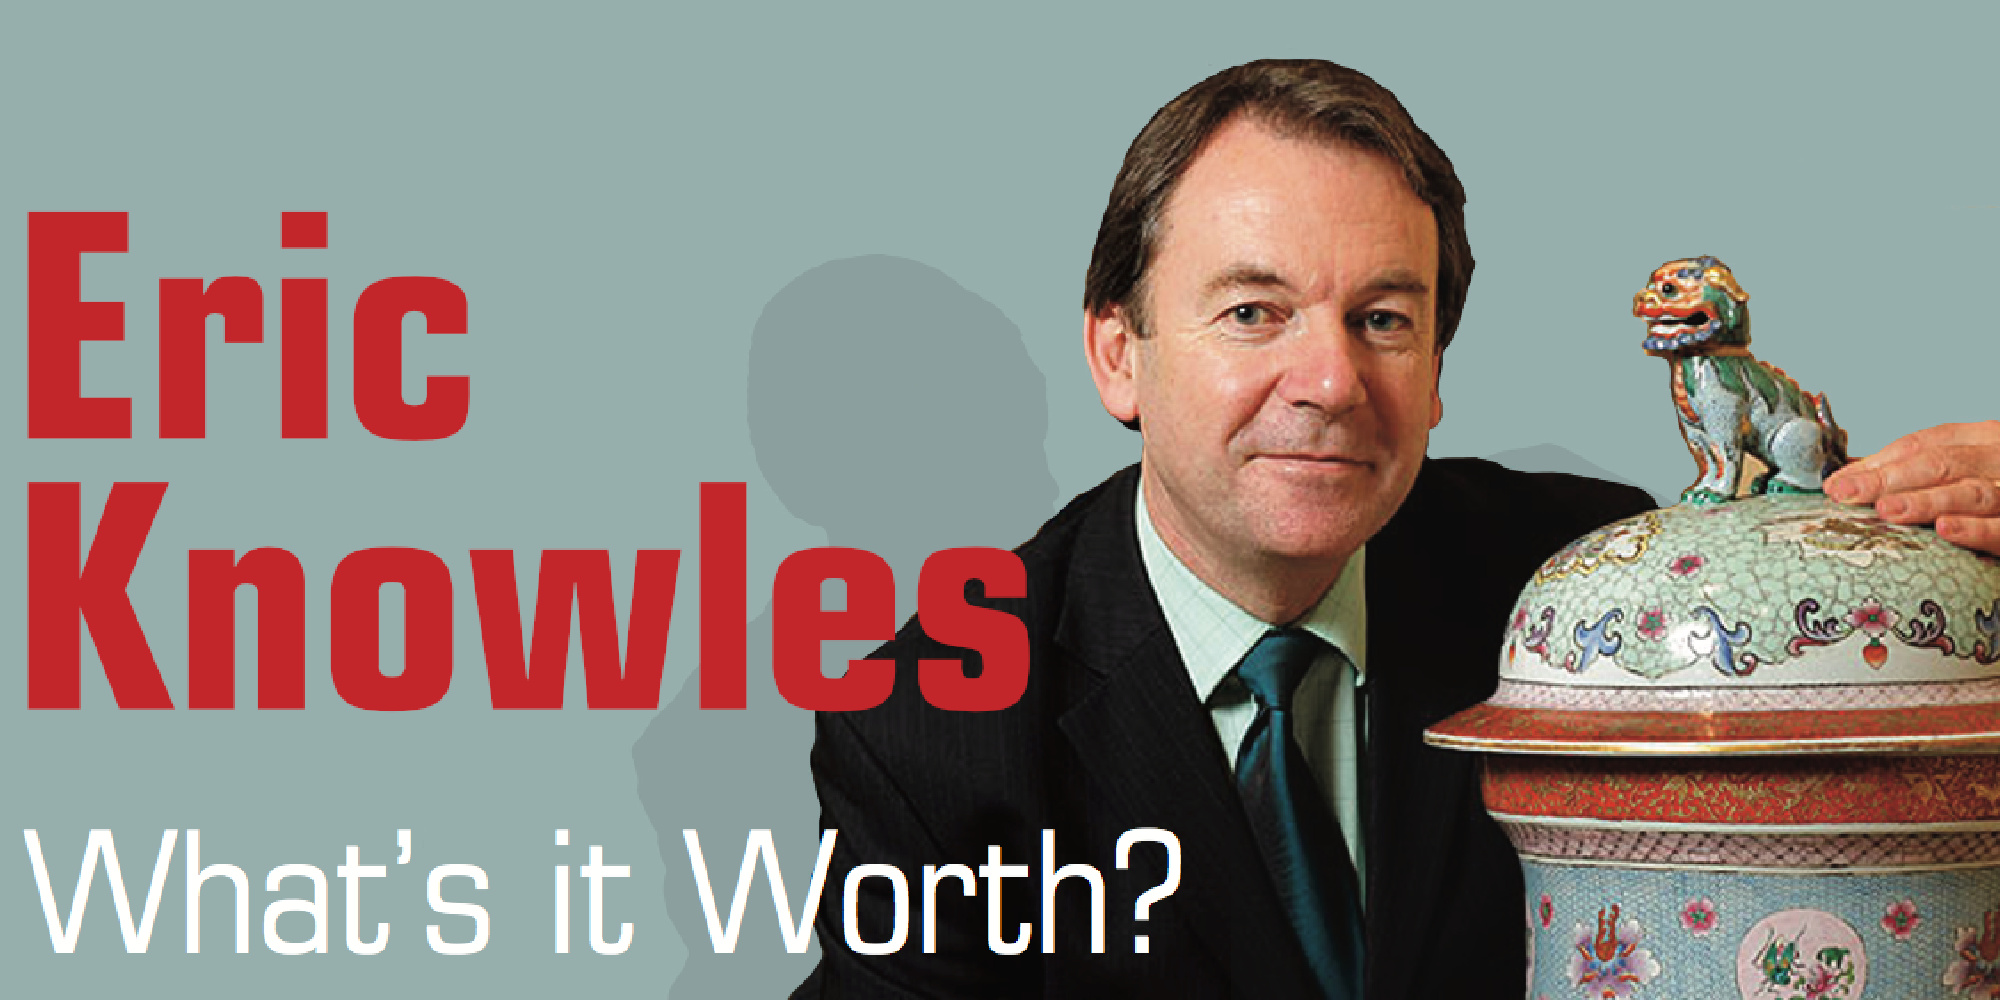 Eric Knowles: What’s it Worth?